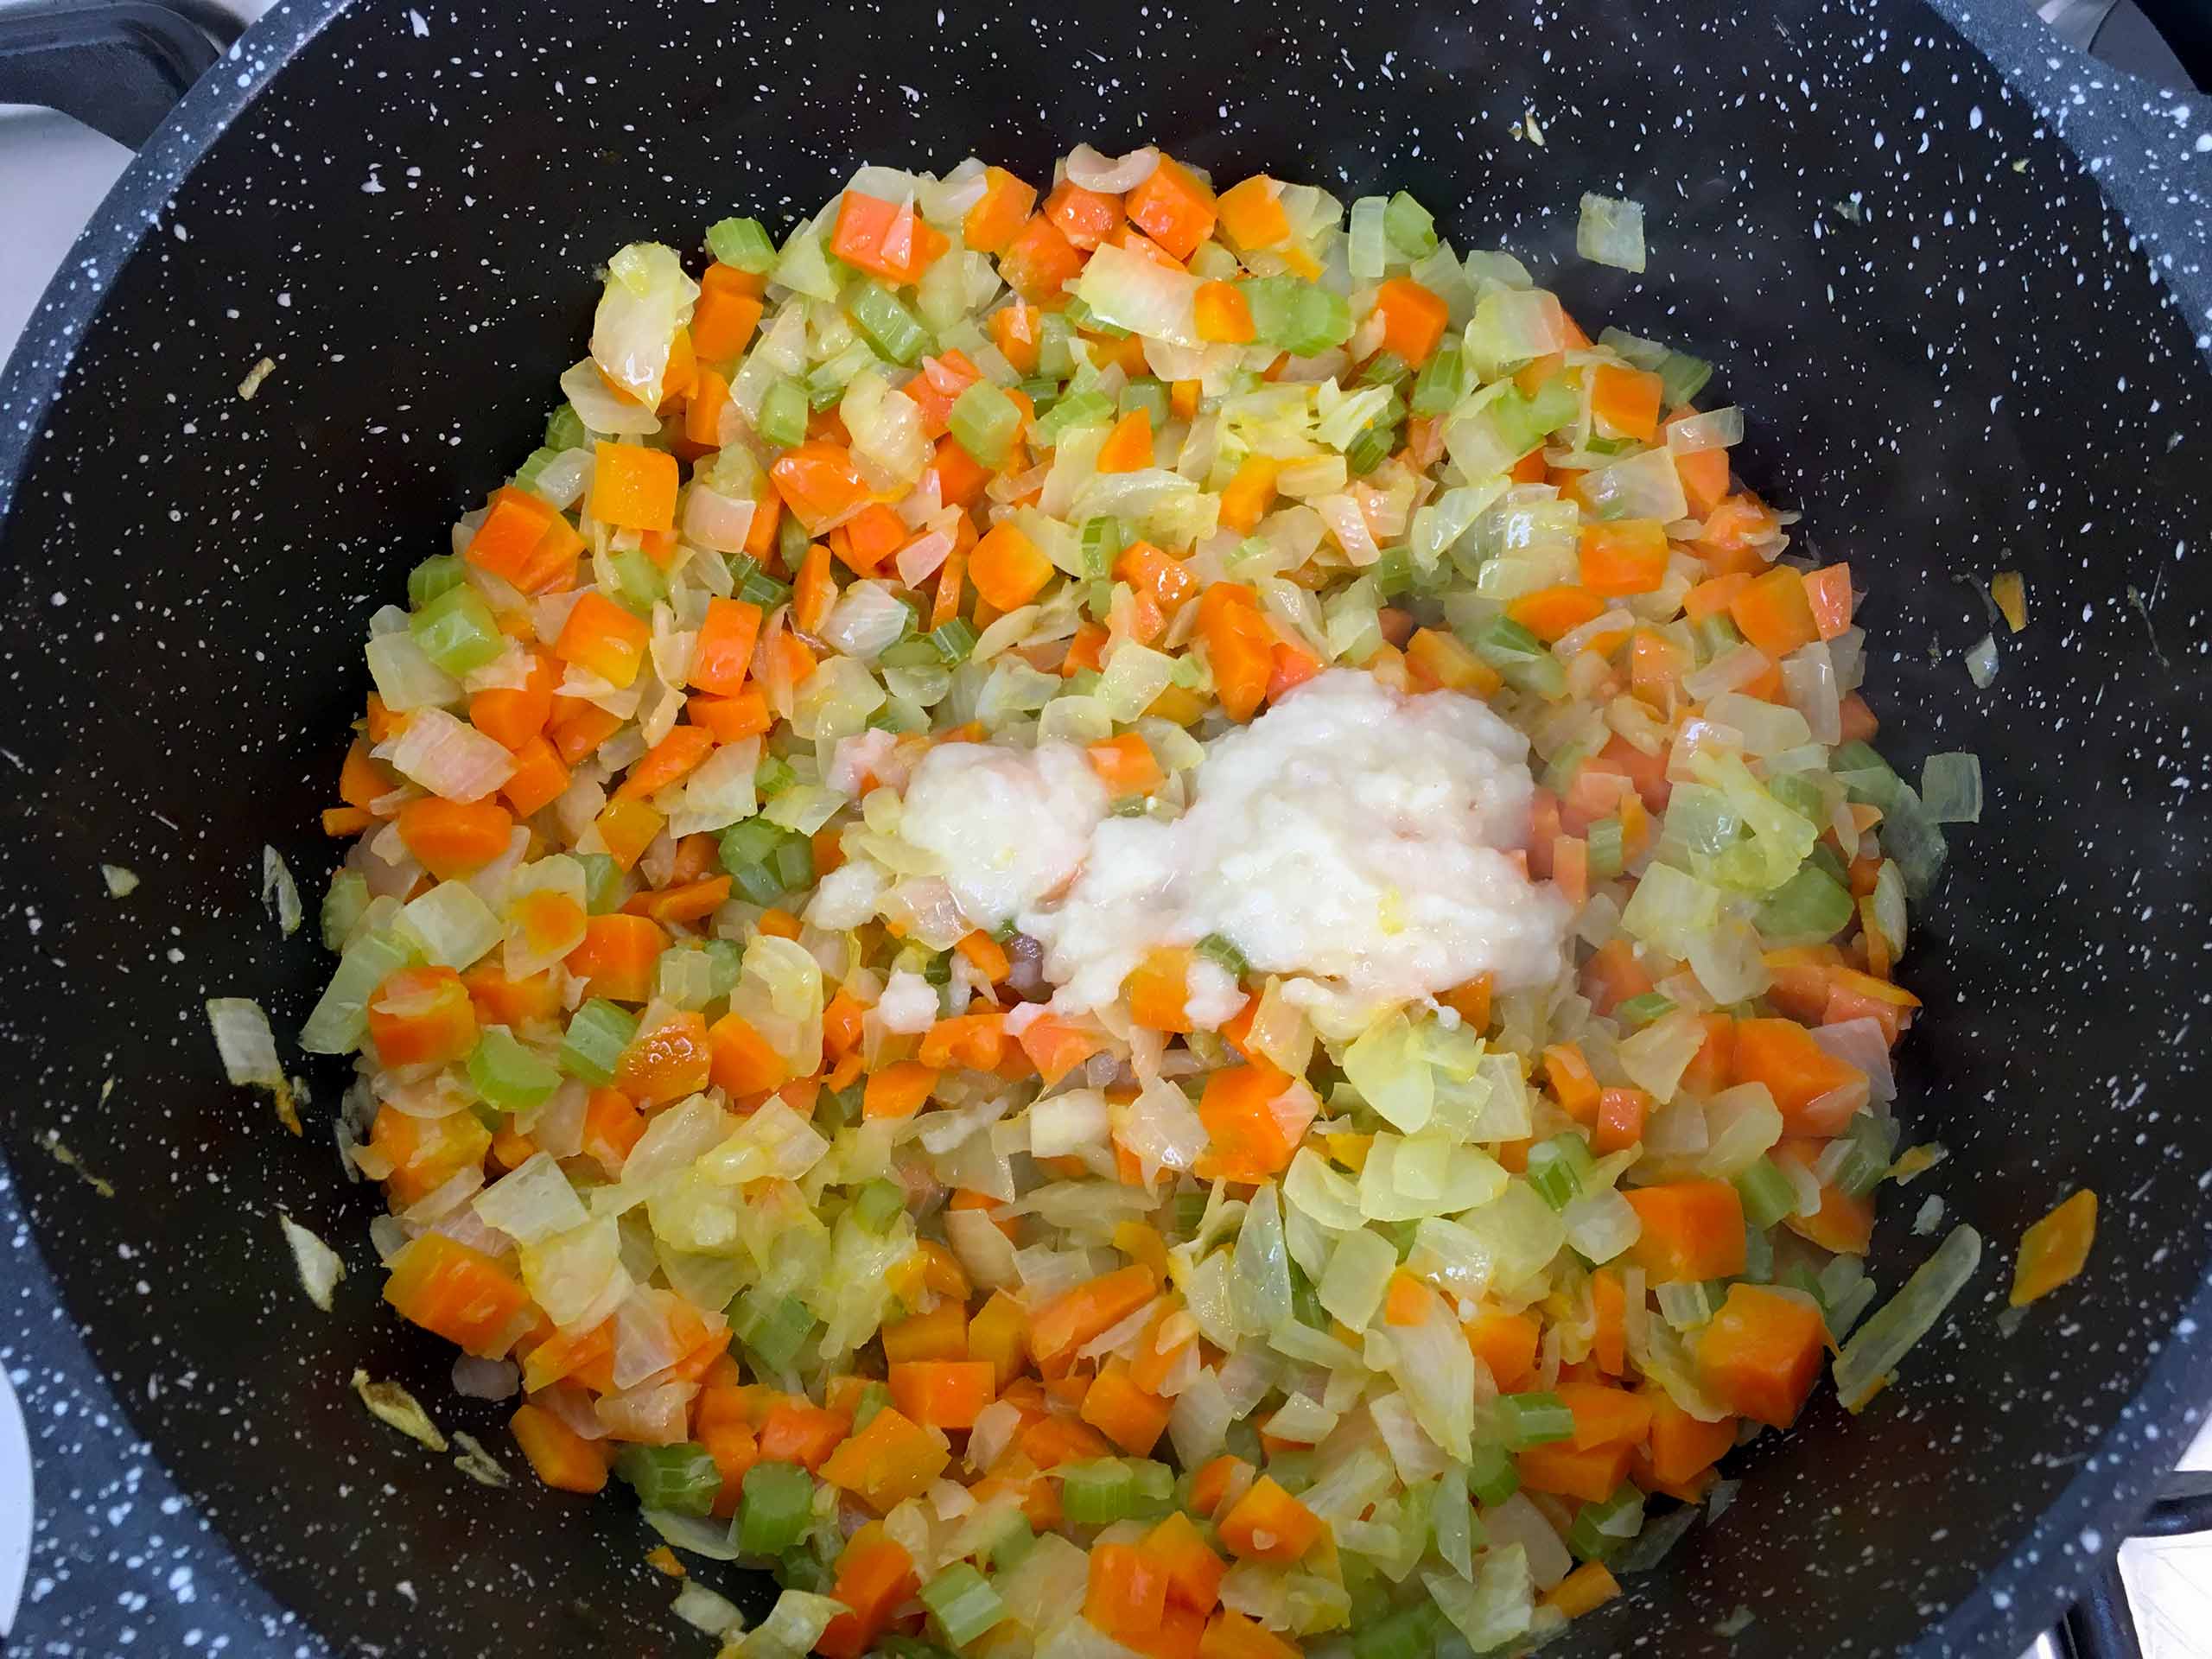 Add the garlic to the vegetables - bolognese sauce